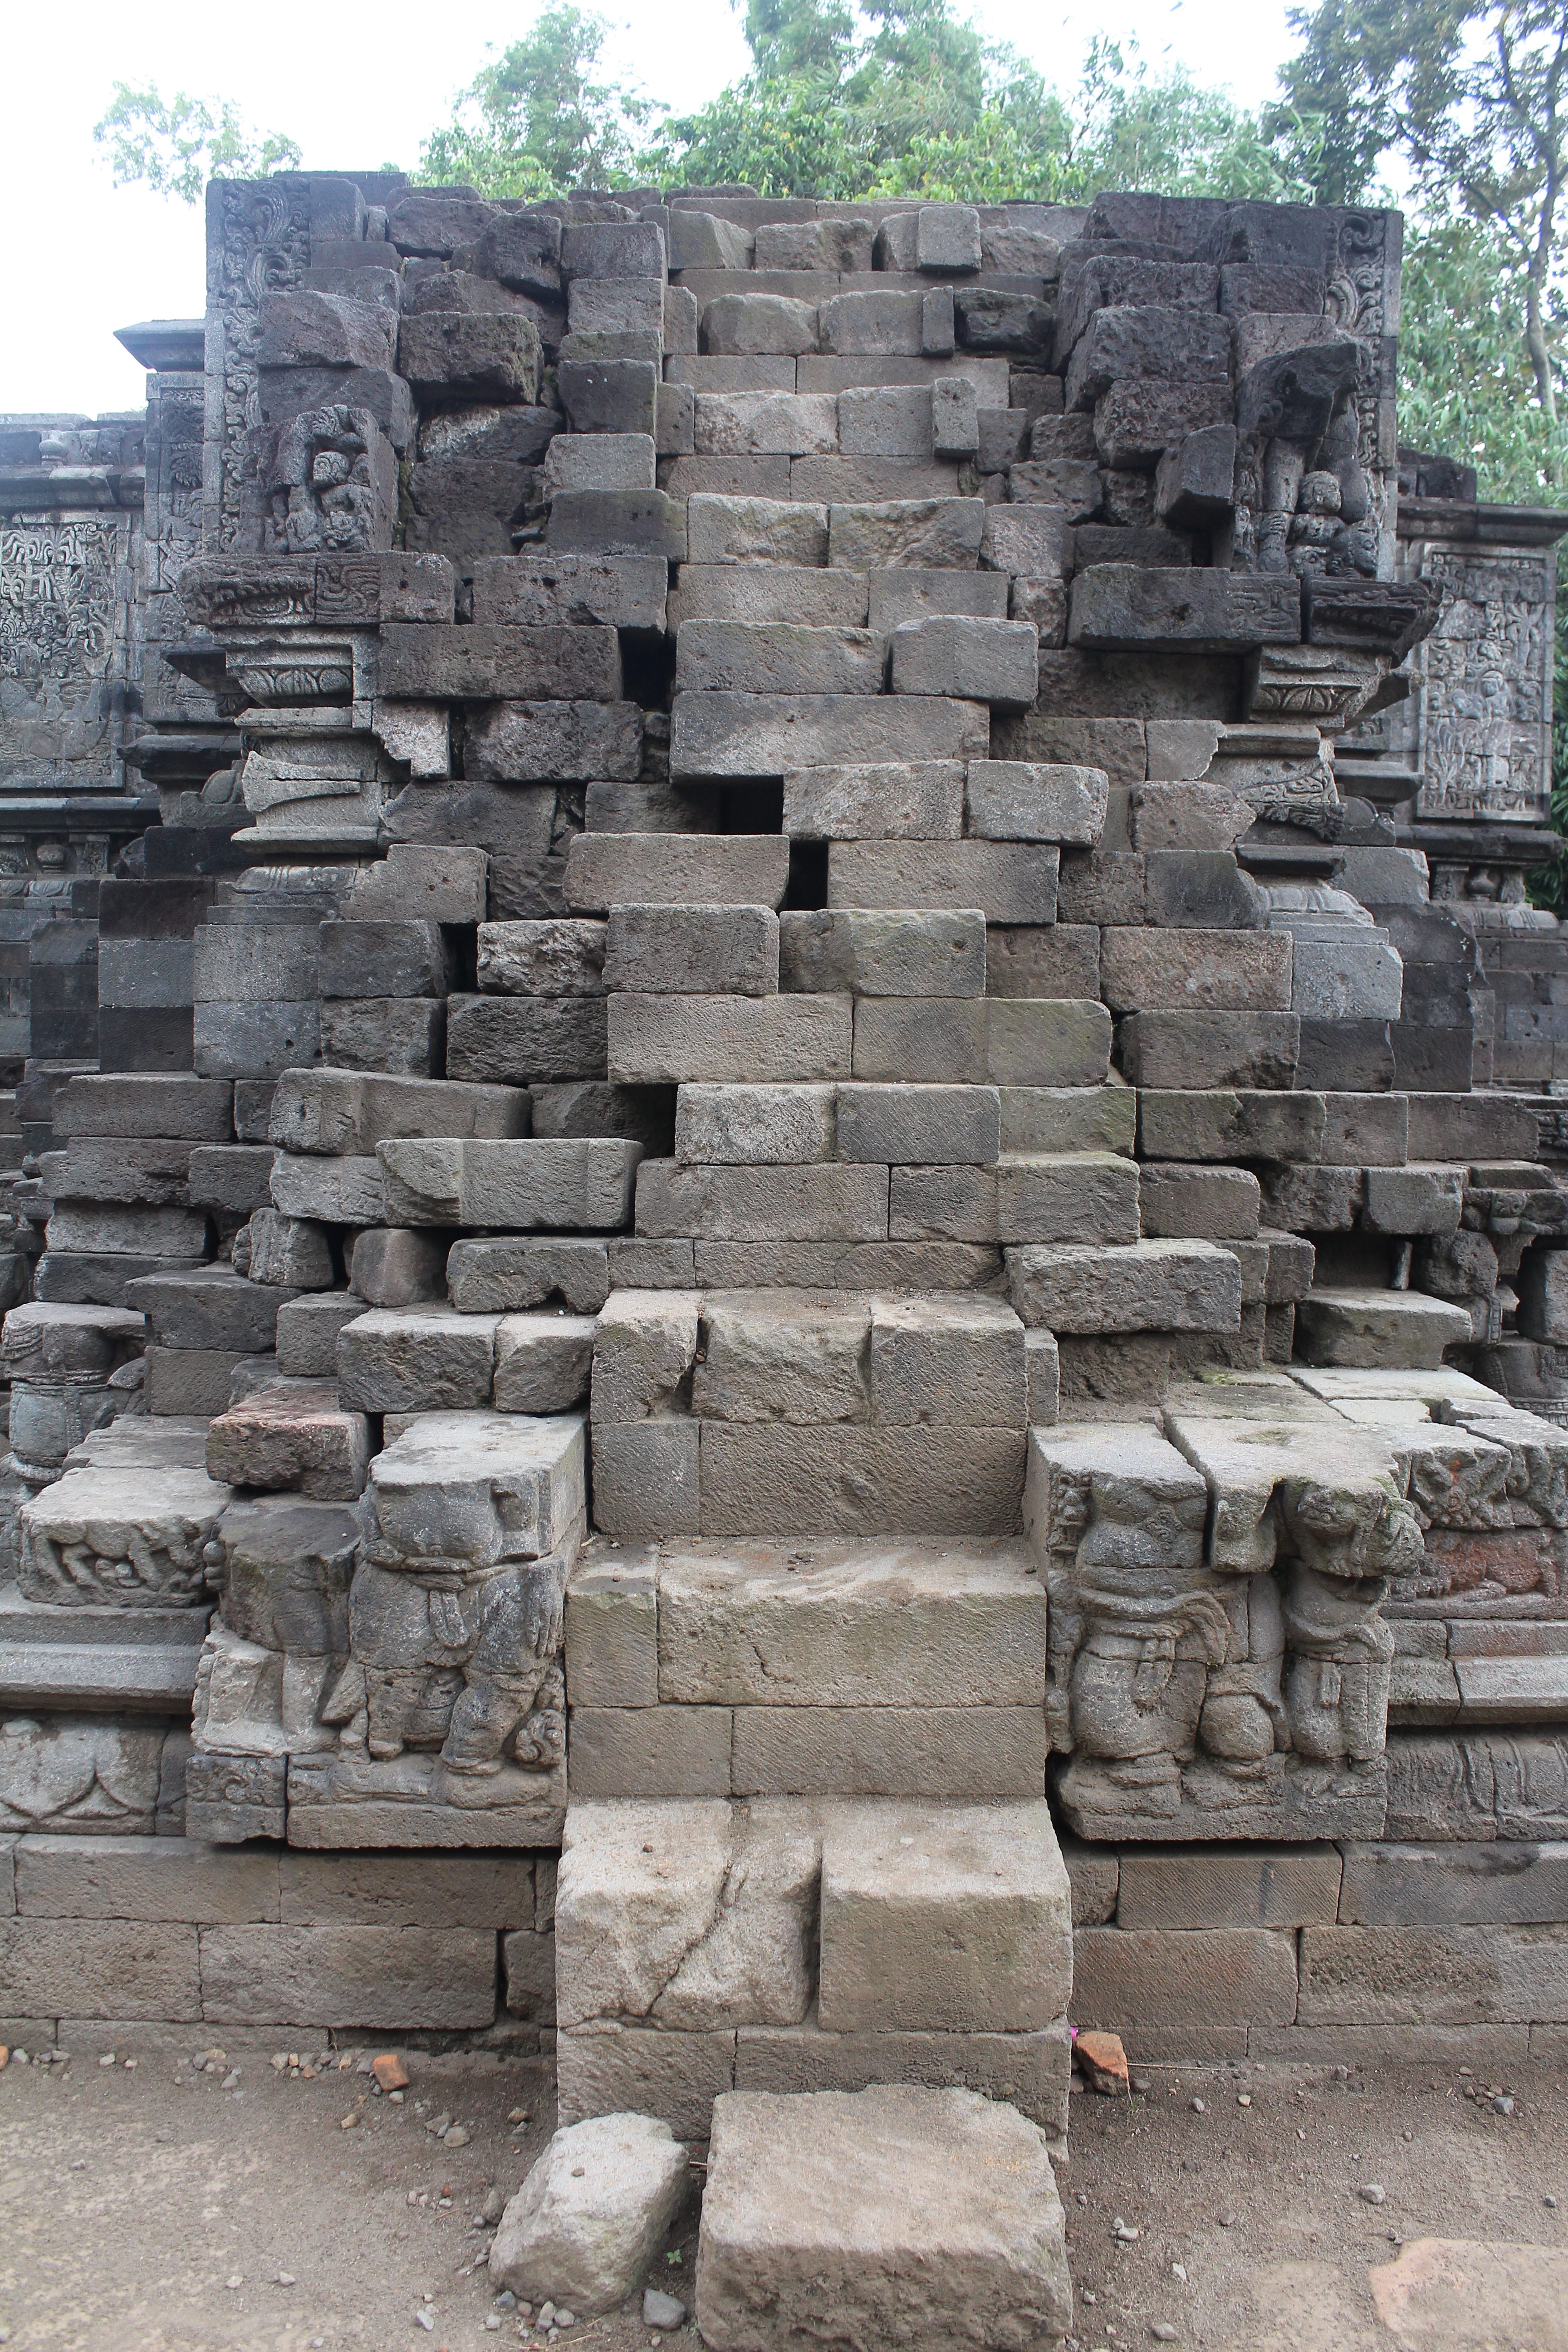 Platform-style temple with relief carvings on all sides